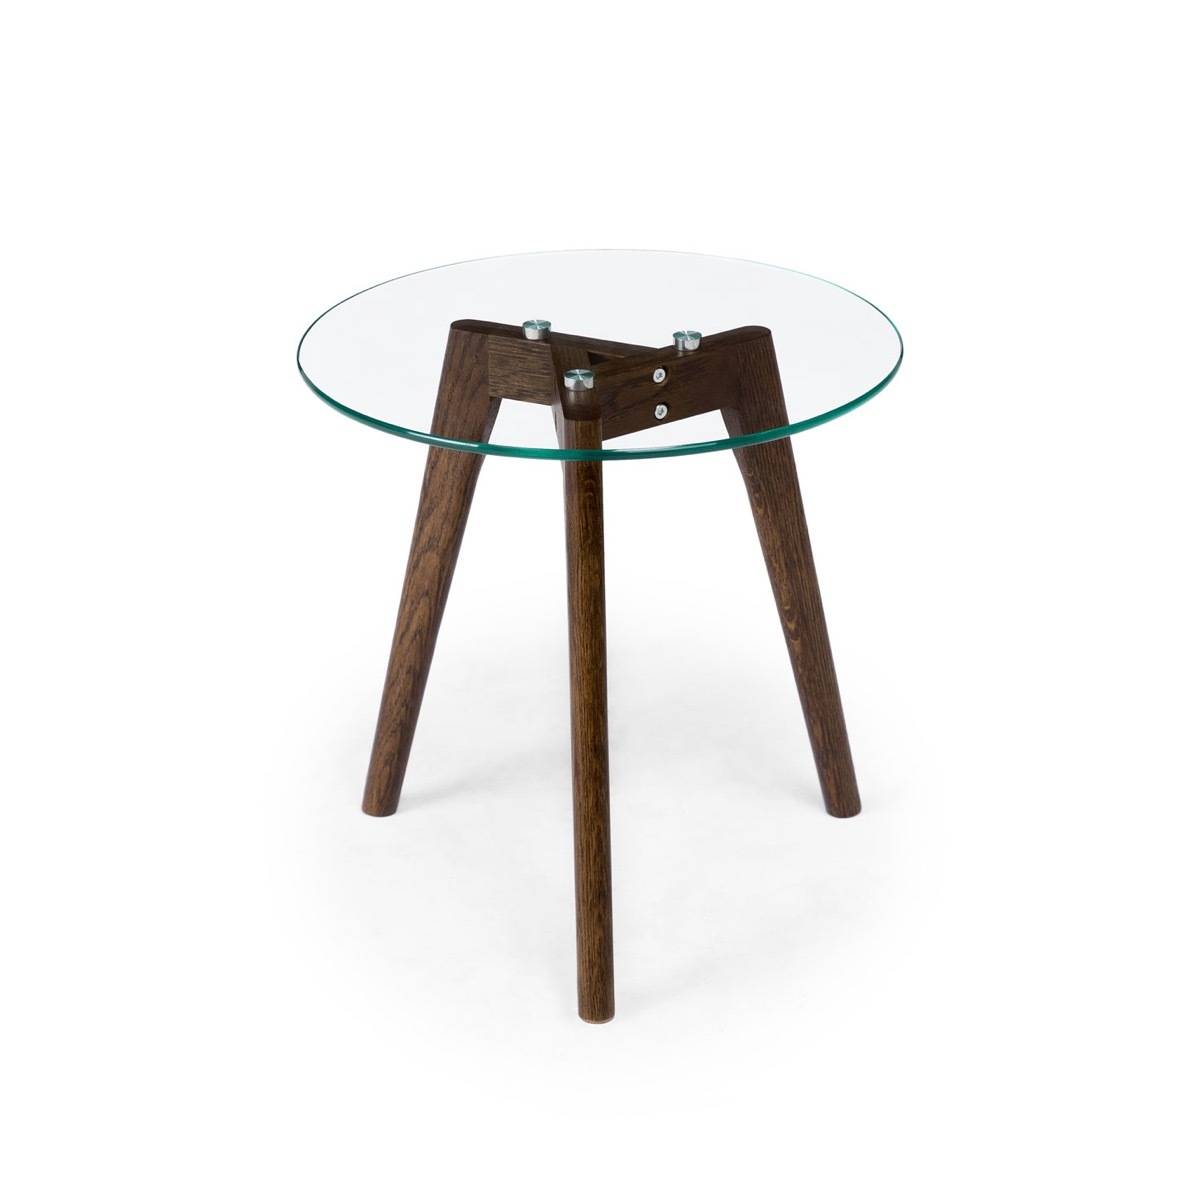 Walnut side table from Article